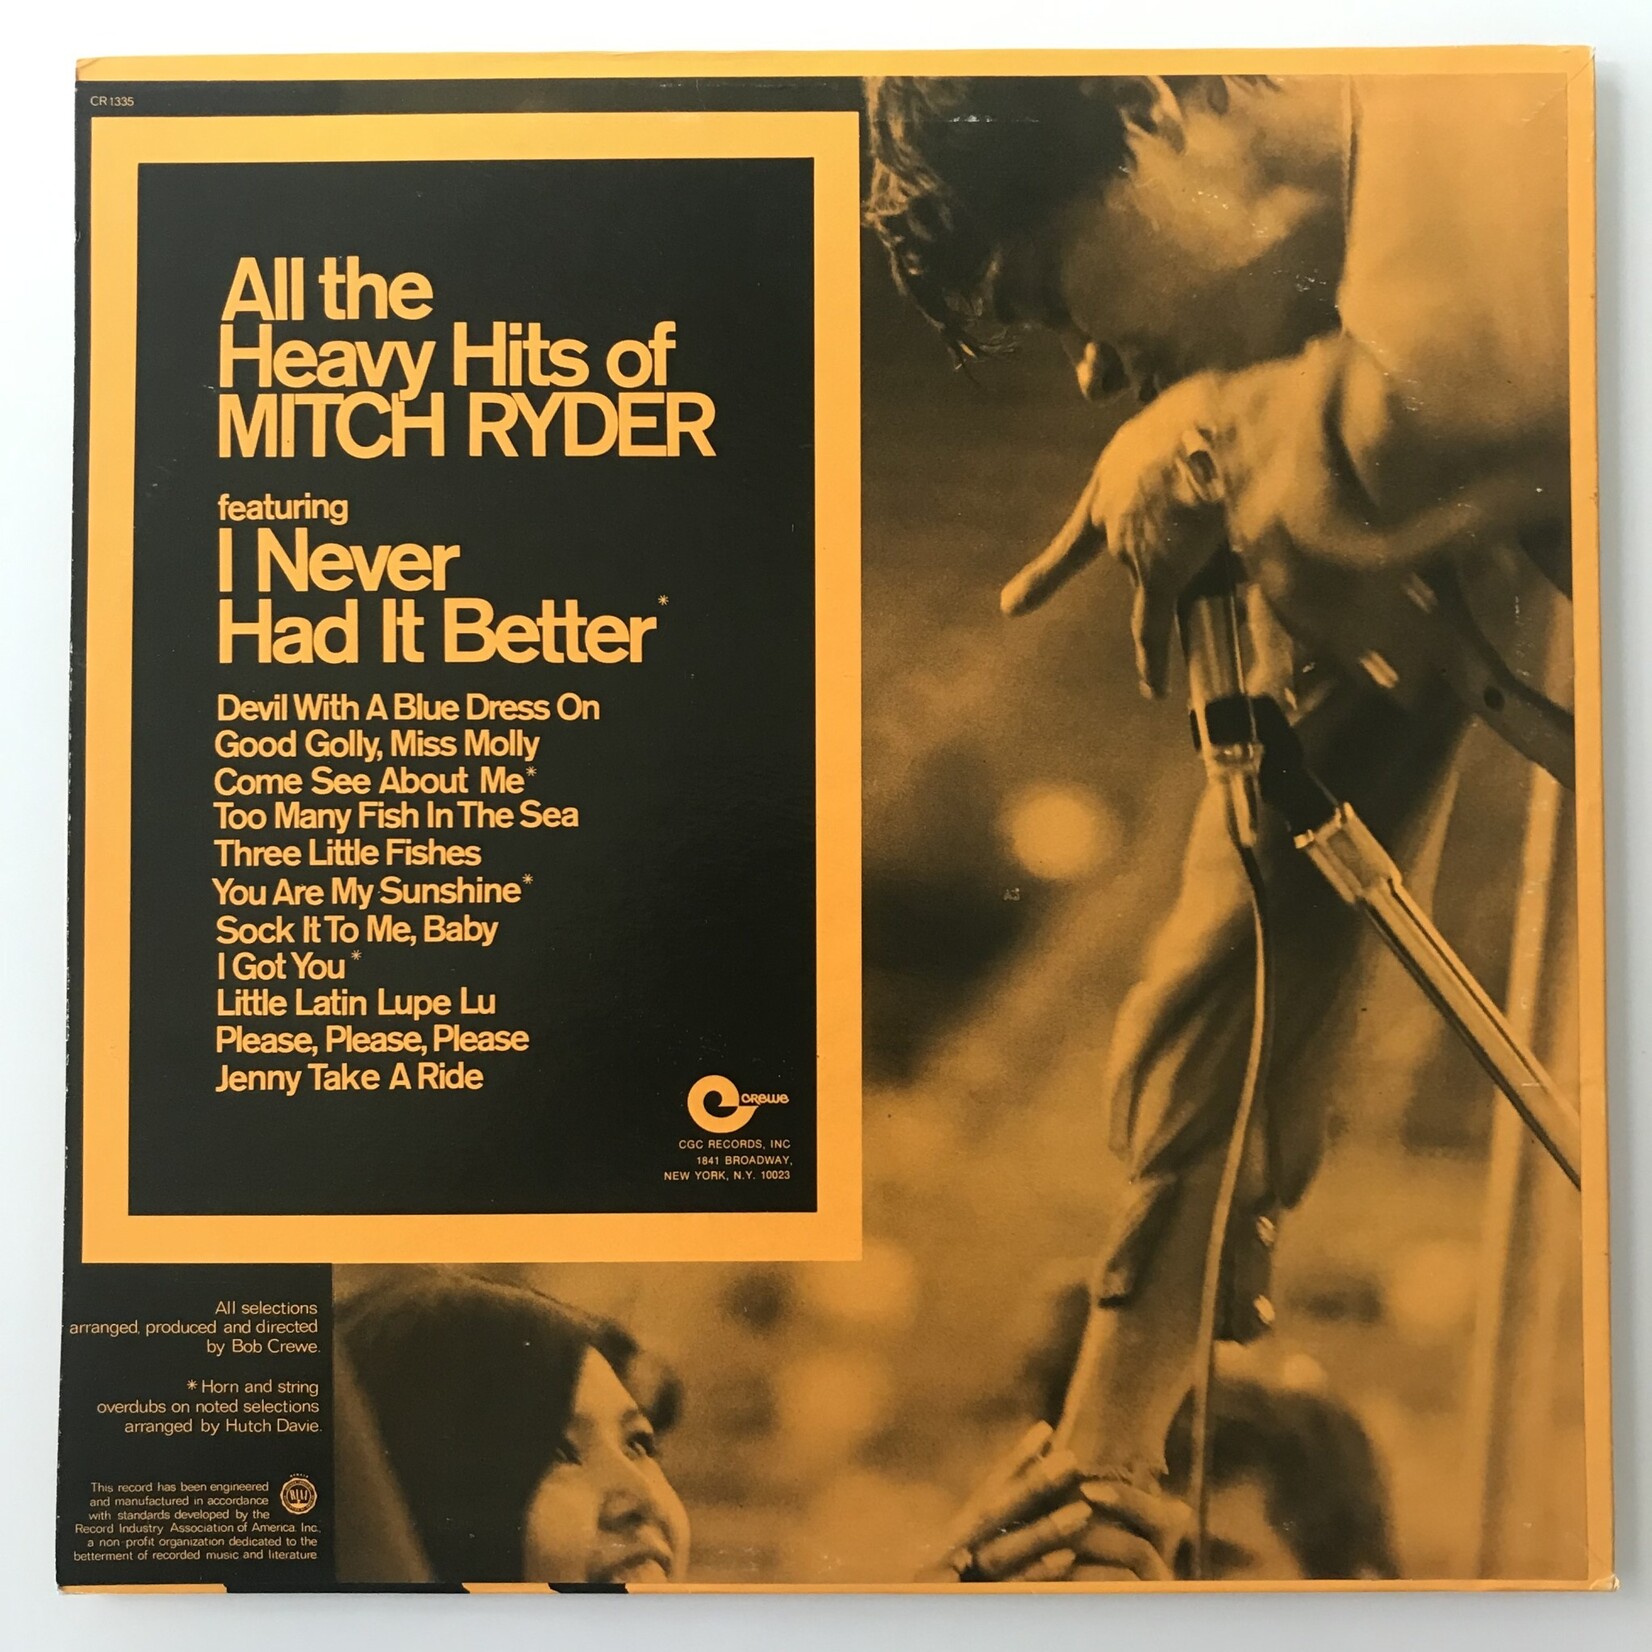 Mitch Ryder - All The Heavy Hits Of Mitch Ryder - Vinyl LP (USED)